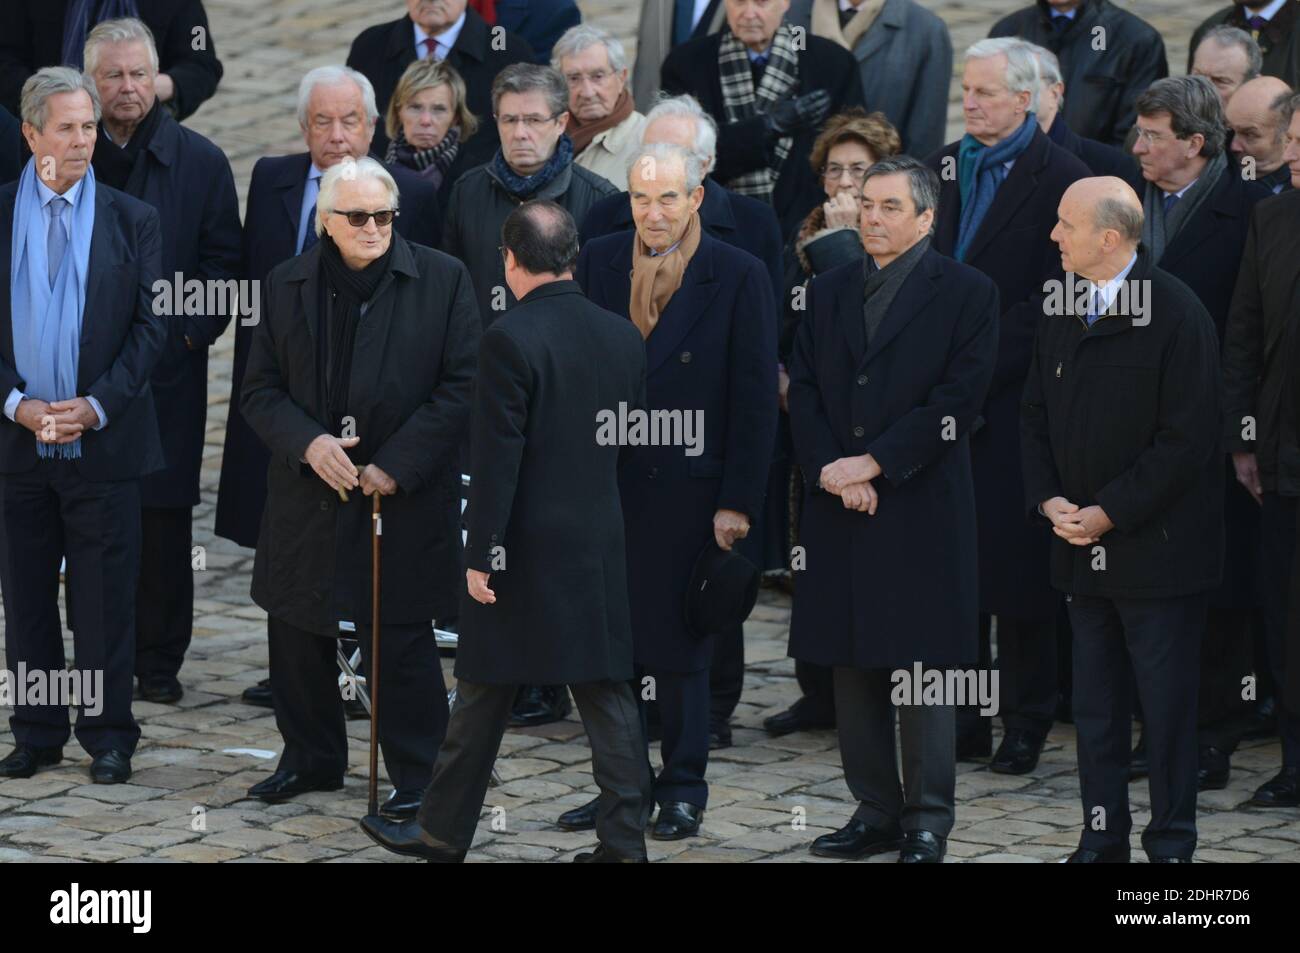 L-R : Jean-Louis Debre, Roland Dumas, Robert Badinter, Francois Fillon, Alain Juppe, Laurent Fabius and Francois Hollande attend national tribute to Yves Guena, in the courtyard of the Invalides, in Paris, France on March 8, 2016. Photo by Ammar Abd Rabbo/ABACAPRESS.COM Stock Photo